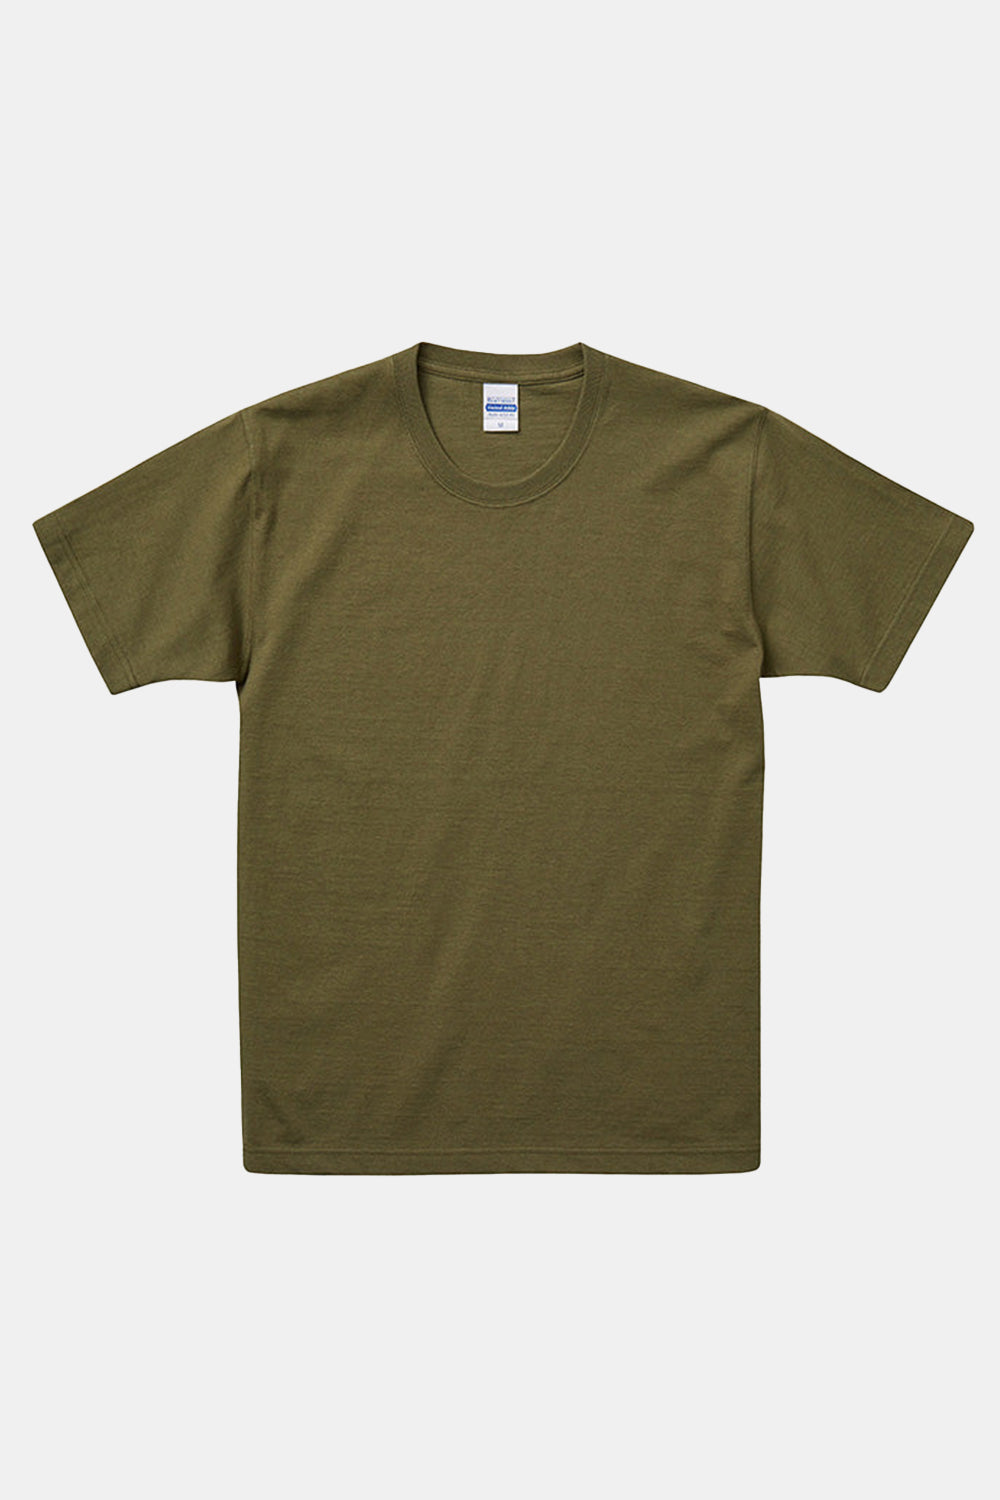 United Athle 4252 Authentic Super Heavyweight 7.1oz T-shirt (Light Olive)
